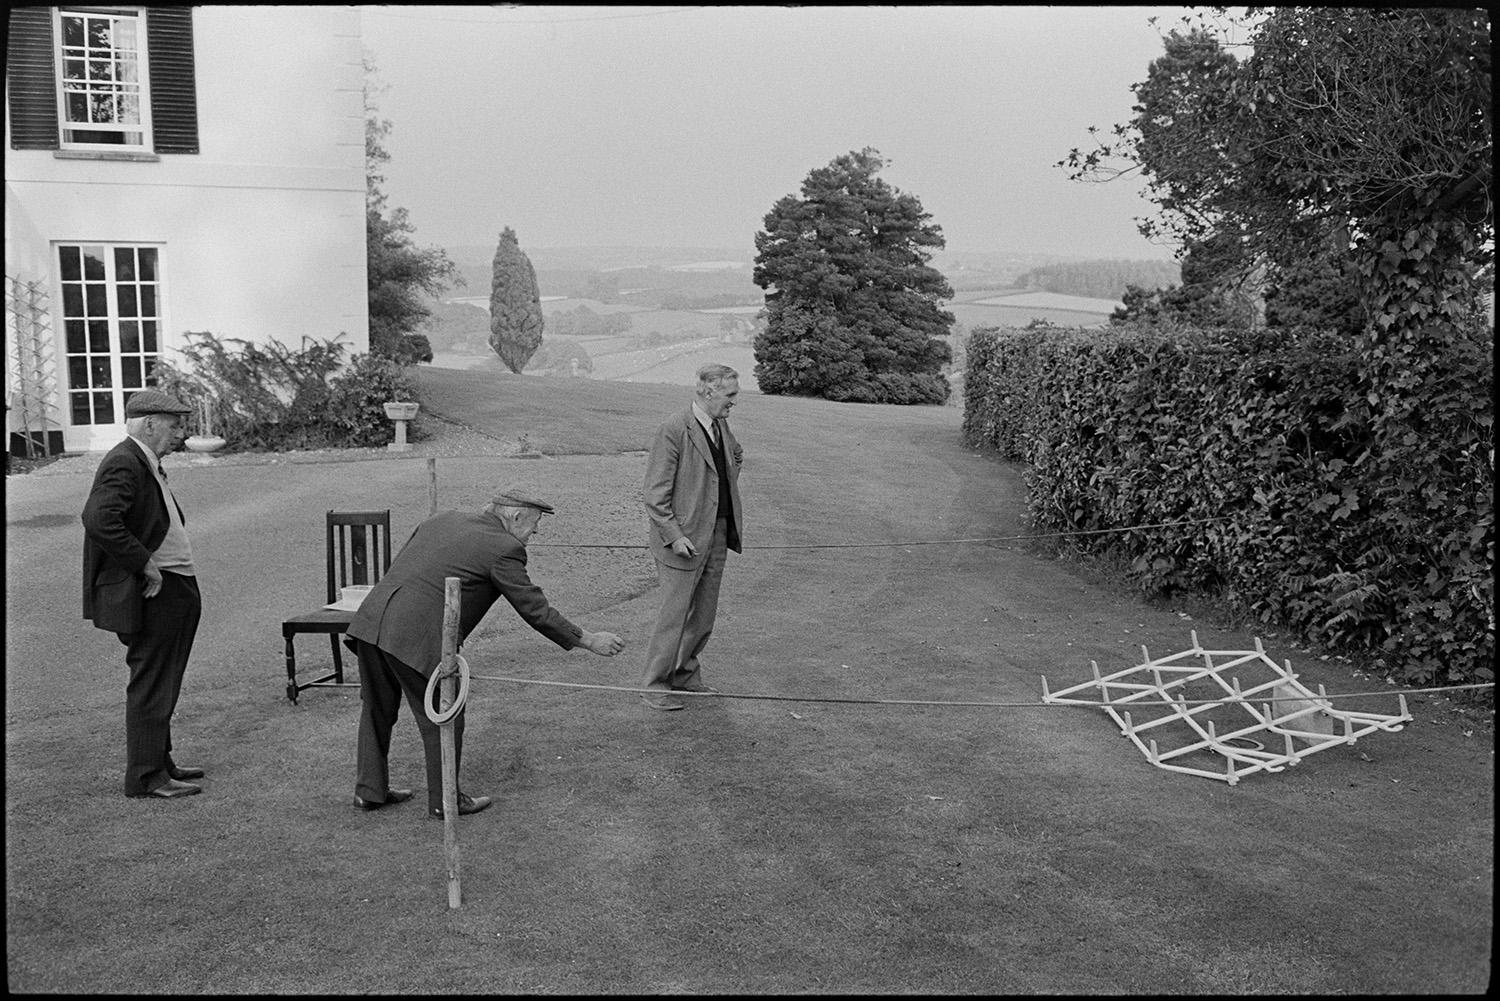 Sideshows at garden fete, bowls, hoop la, billiards, golf.
[Three men playing hoop-la on the lawn at a fete at the Old Rectory, Merton with distant views of the countryside and trees in the background.]